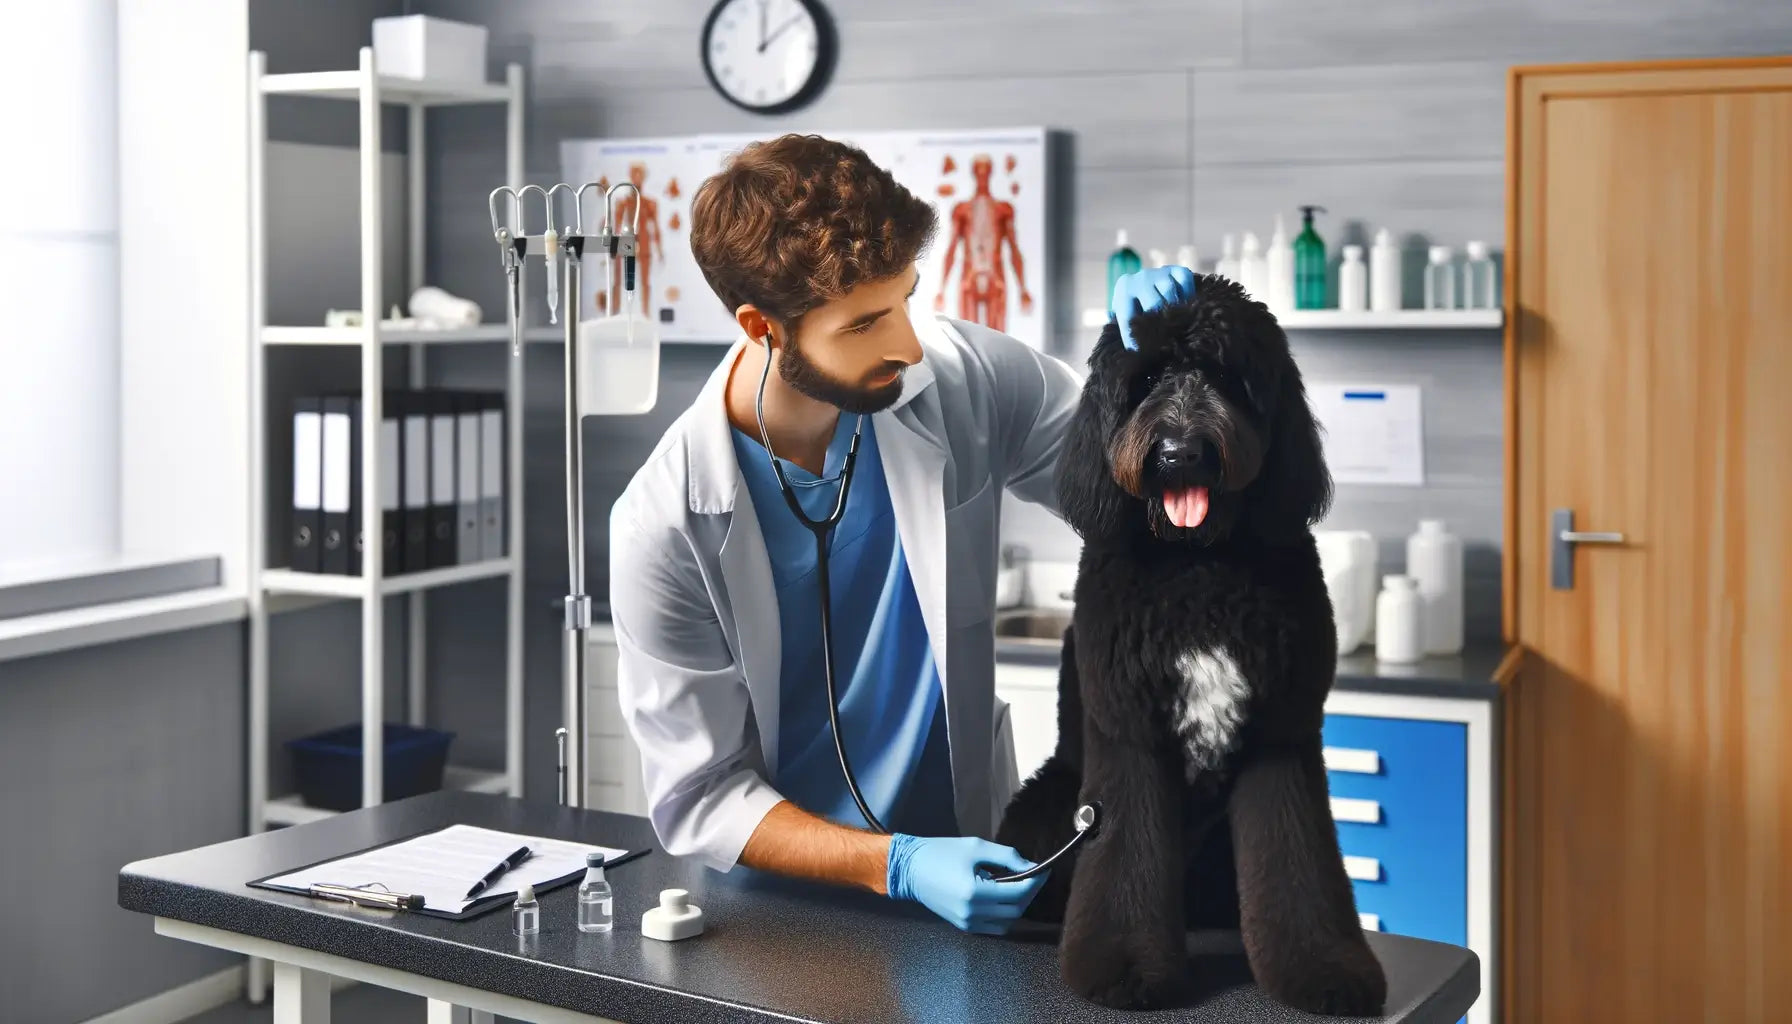 Black Goldendoodle during a veterinary check-up where the veterinarian is inspecting the dog's ears, eyes, and teeth.